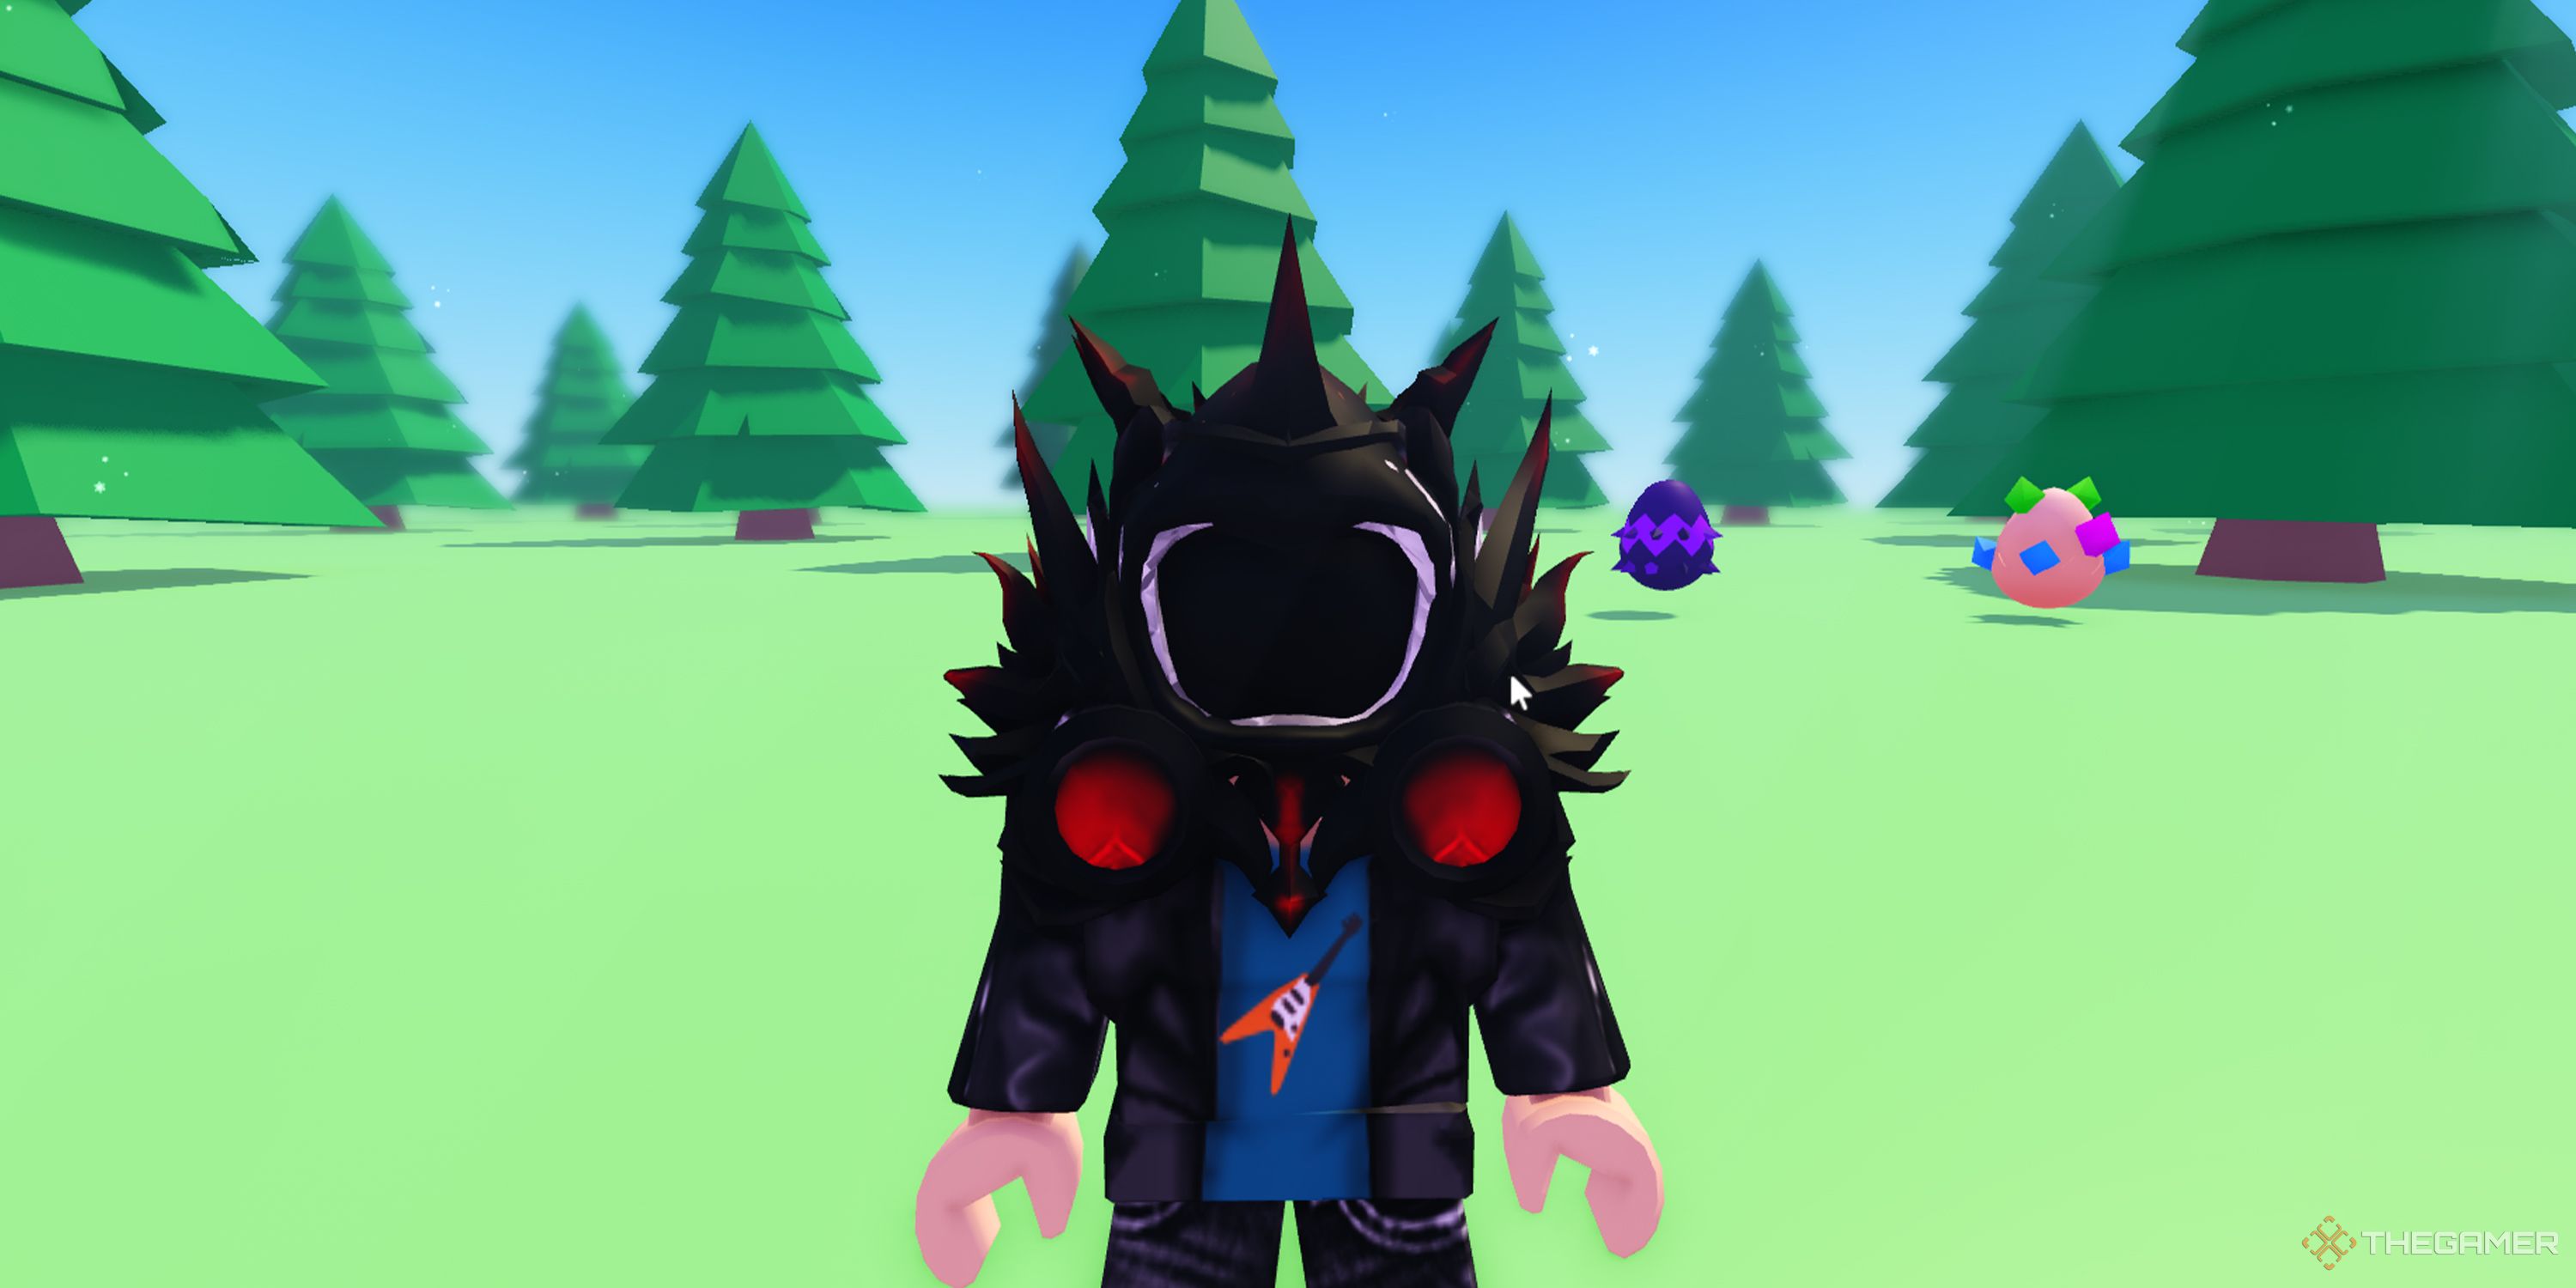 A Roblox character tries on a spikey, black-and-red helmet UGC while standing still in a forest in UGC Don't Move.